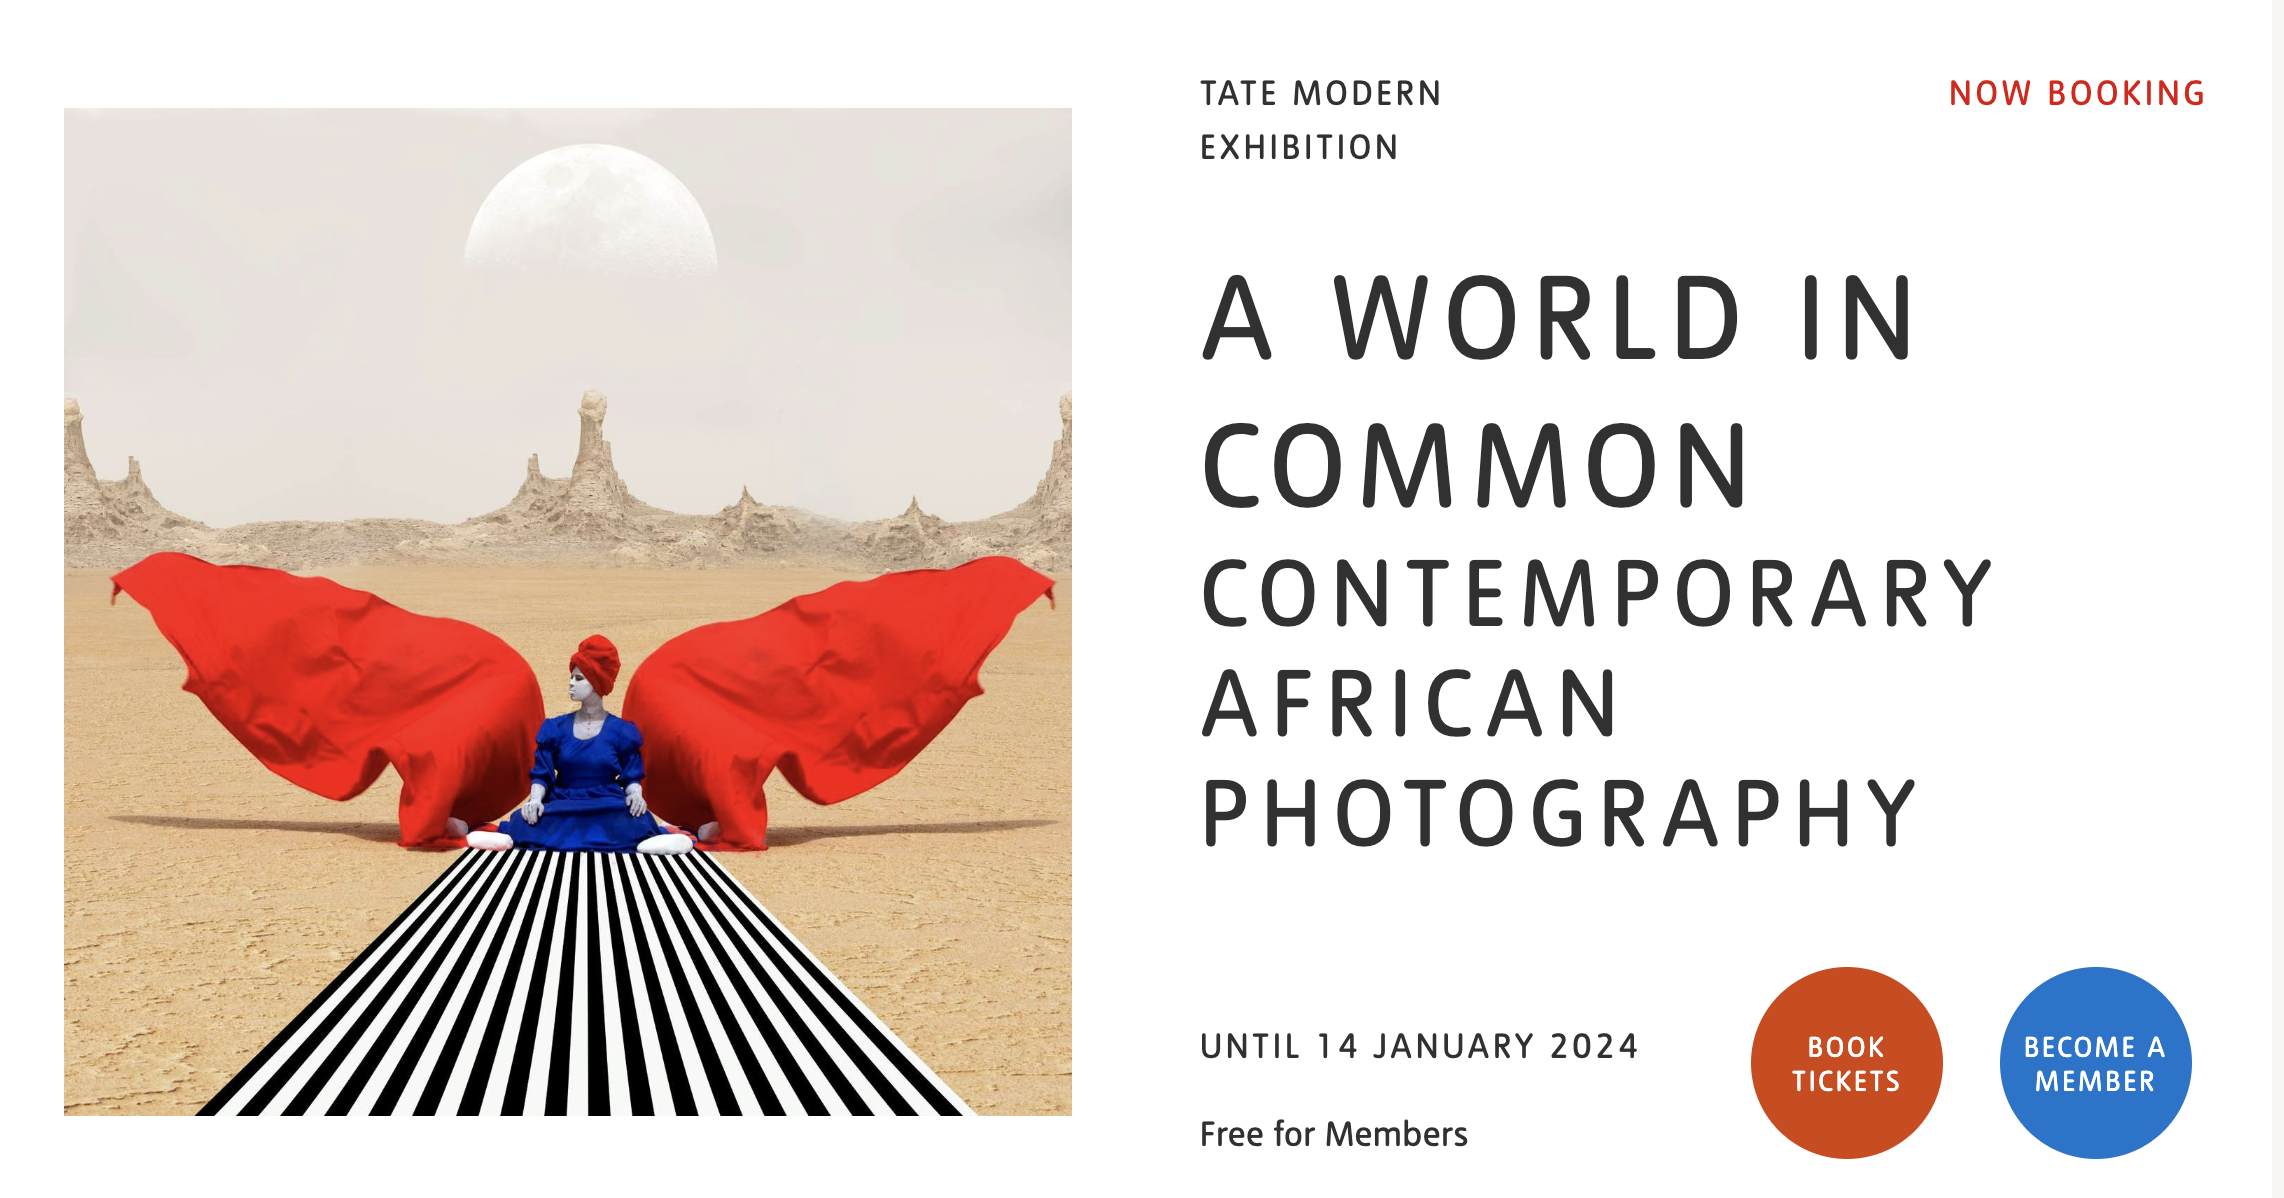 TATE MODERN: A celebration of the varied landscape of contemporary African photography today